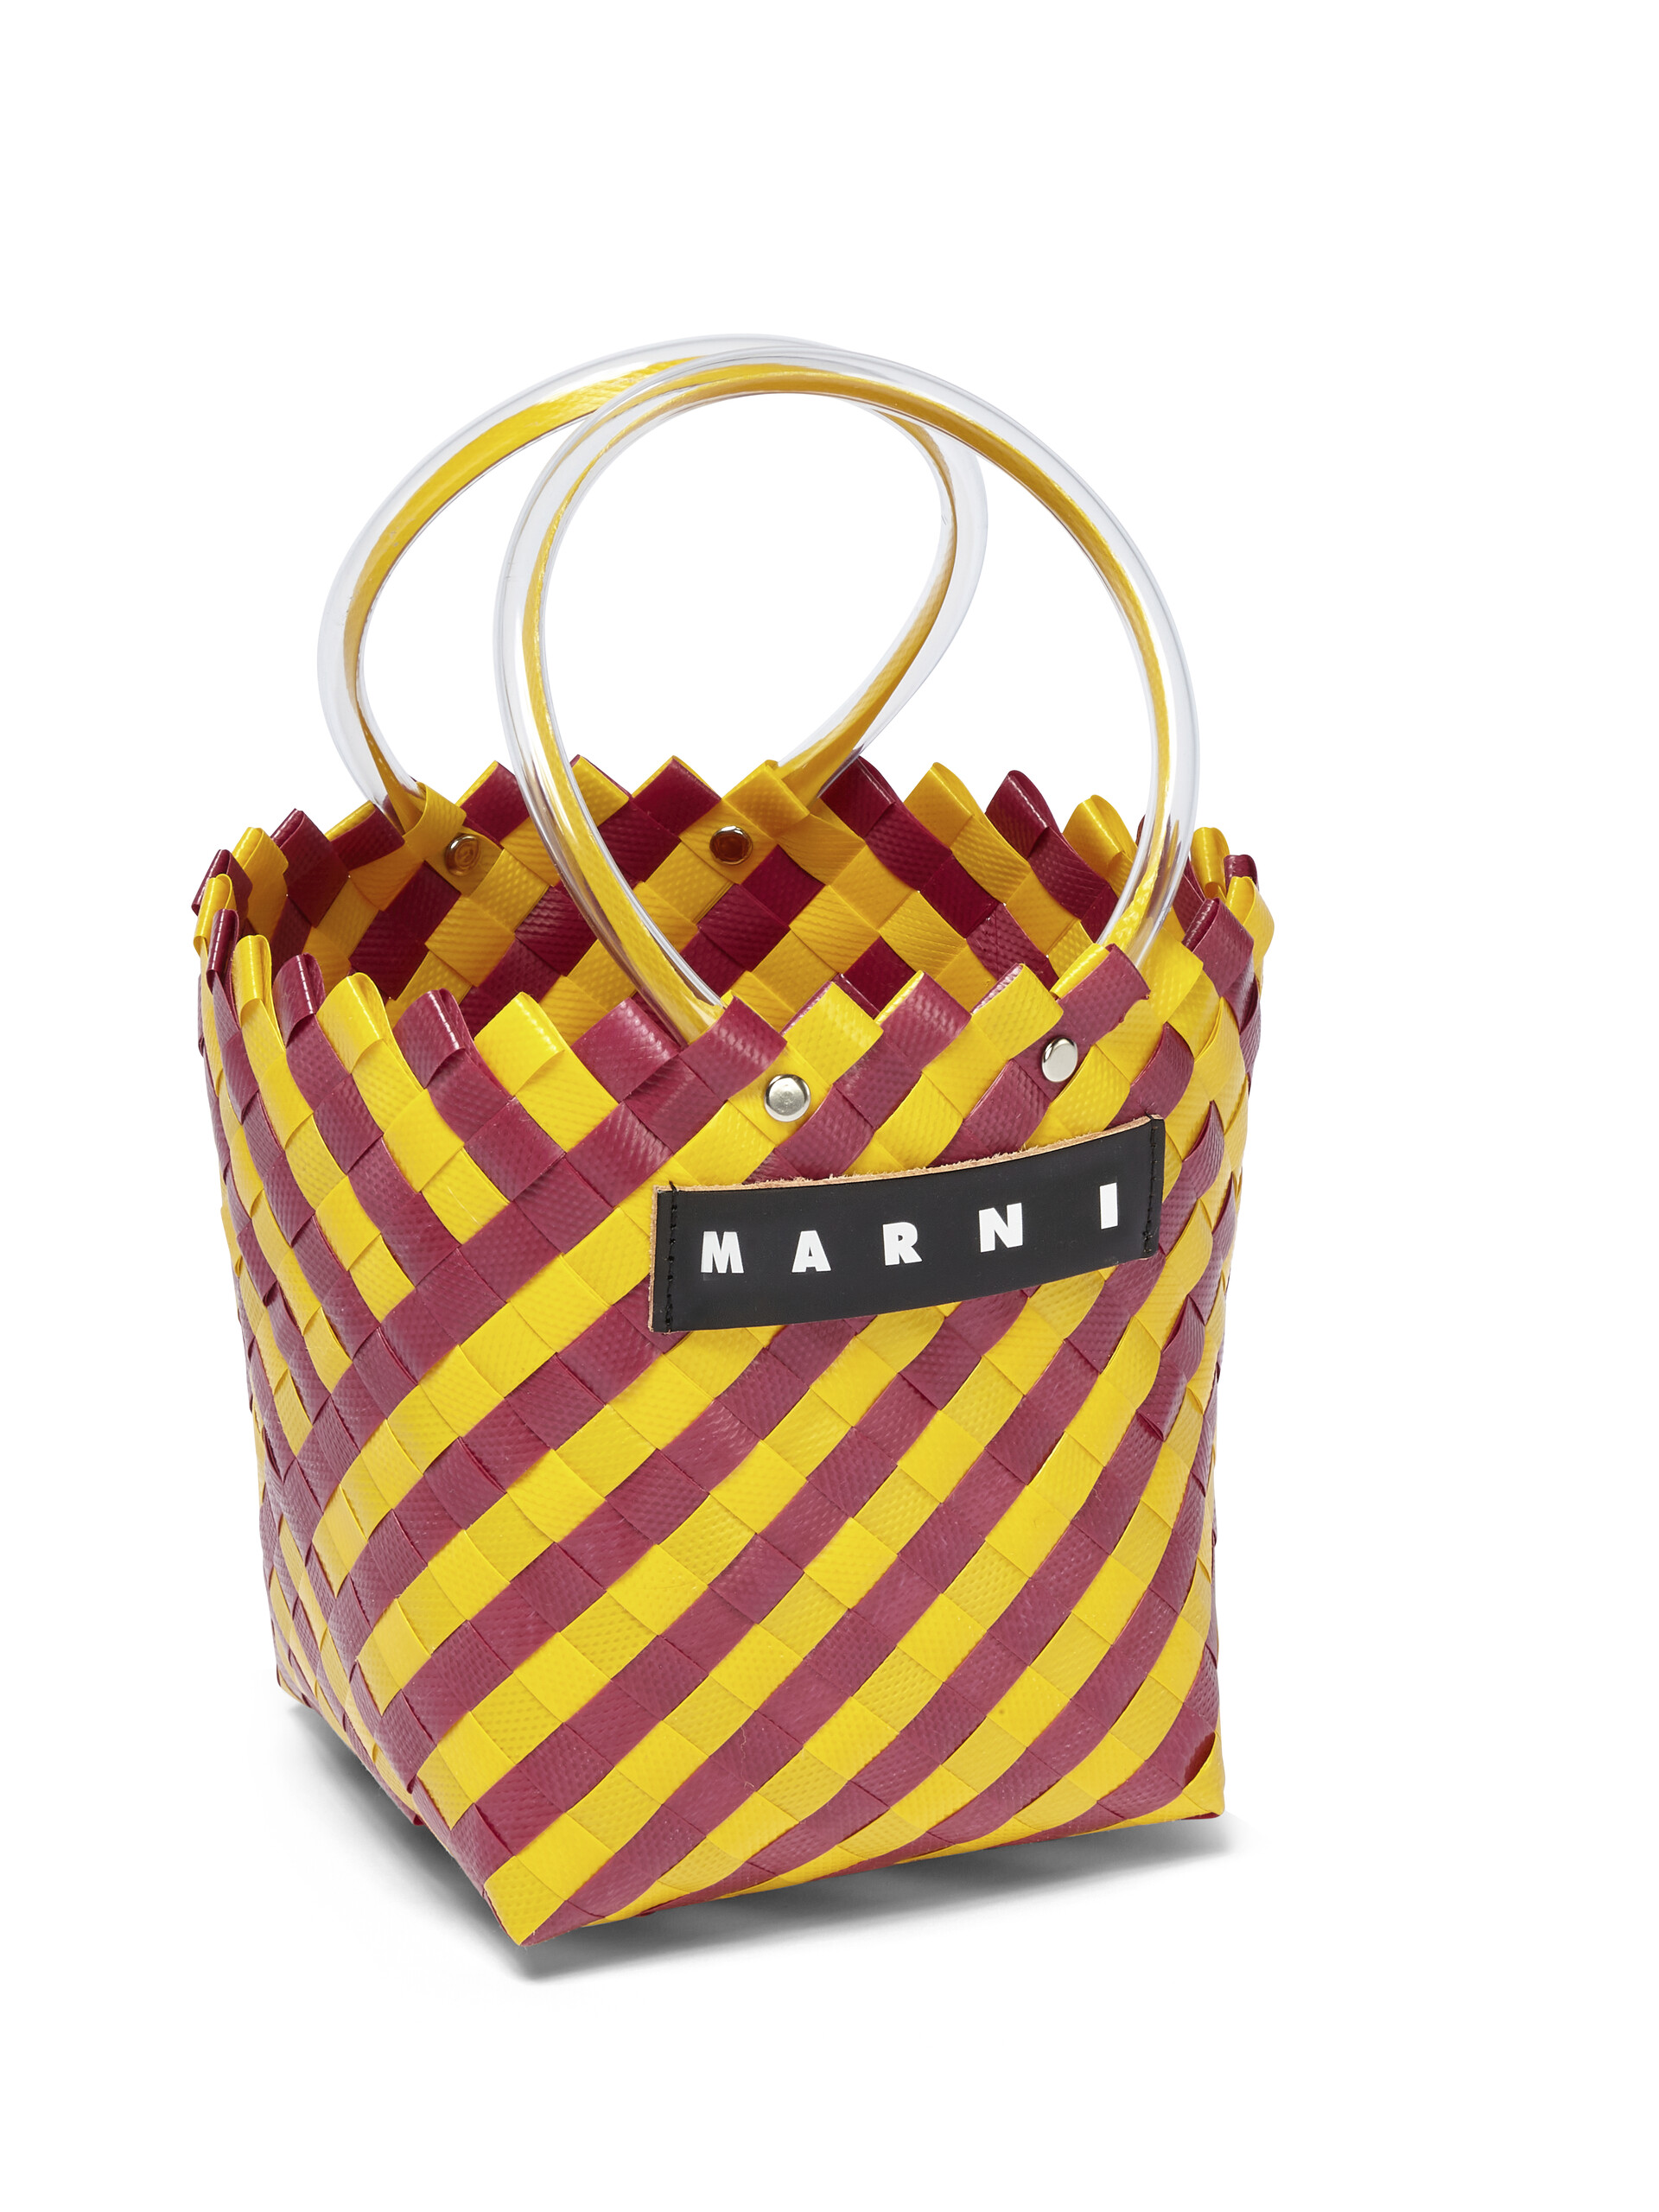 MARNI MARKET TAHA bag in yellow and turquoise woven material - Shopping Bags - Image 4